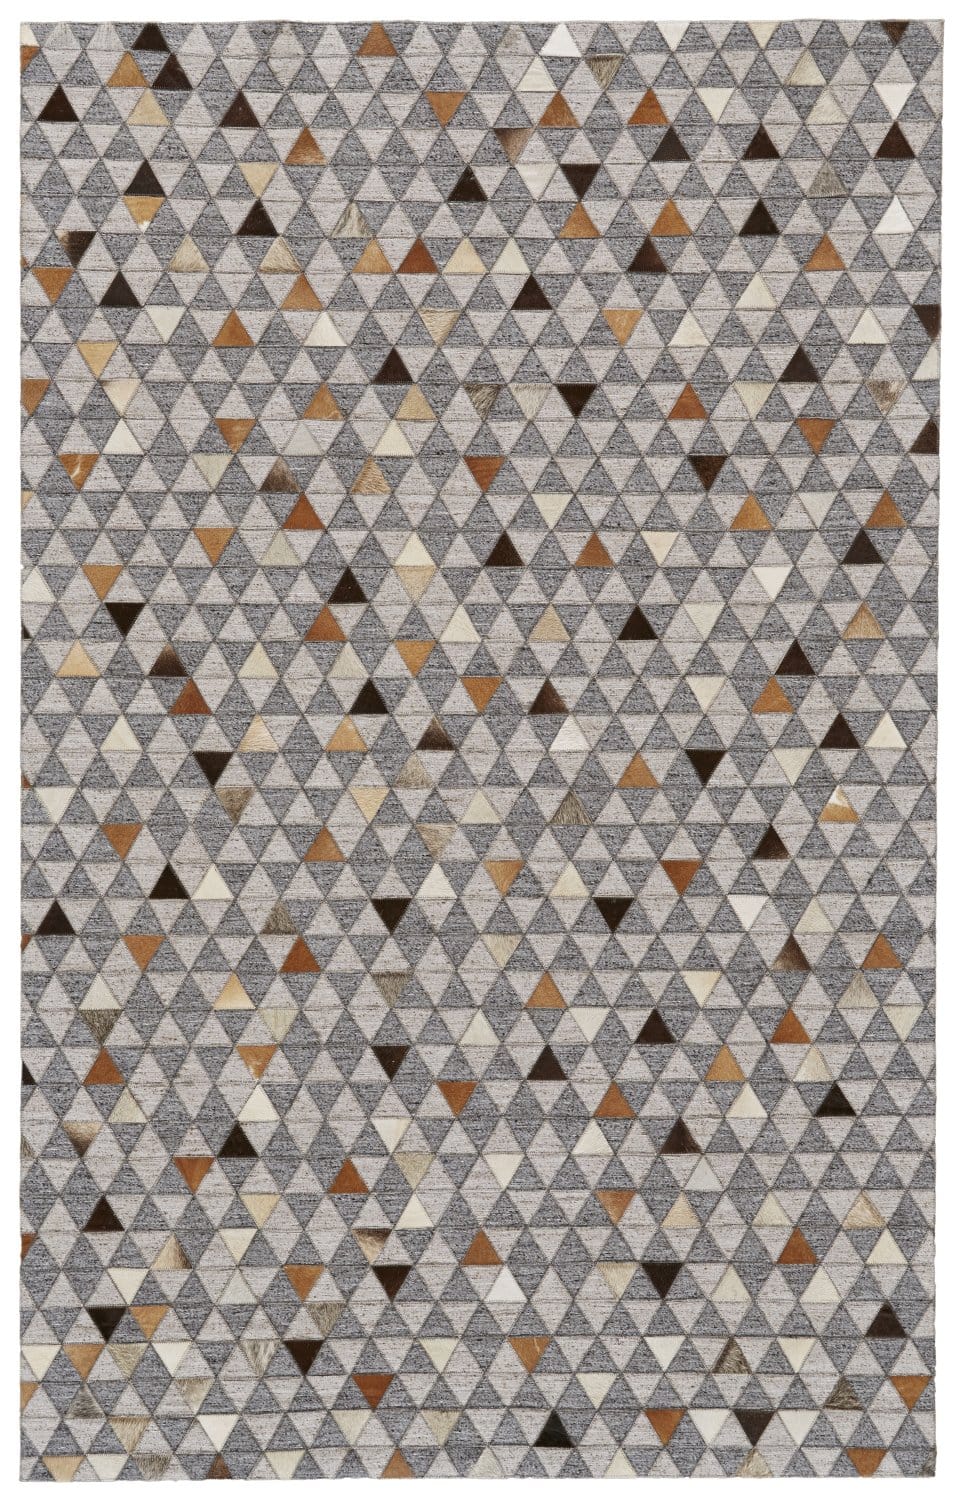 Feizy Fannin Handmade Mosaic Leather Rug - Wolf Gray & Rust - Available in 4 Sizes